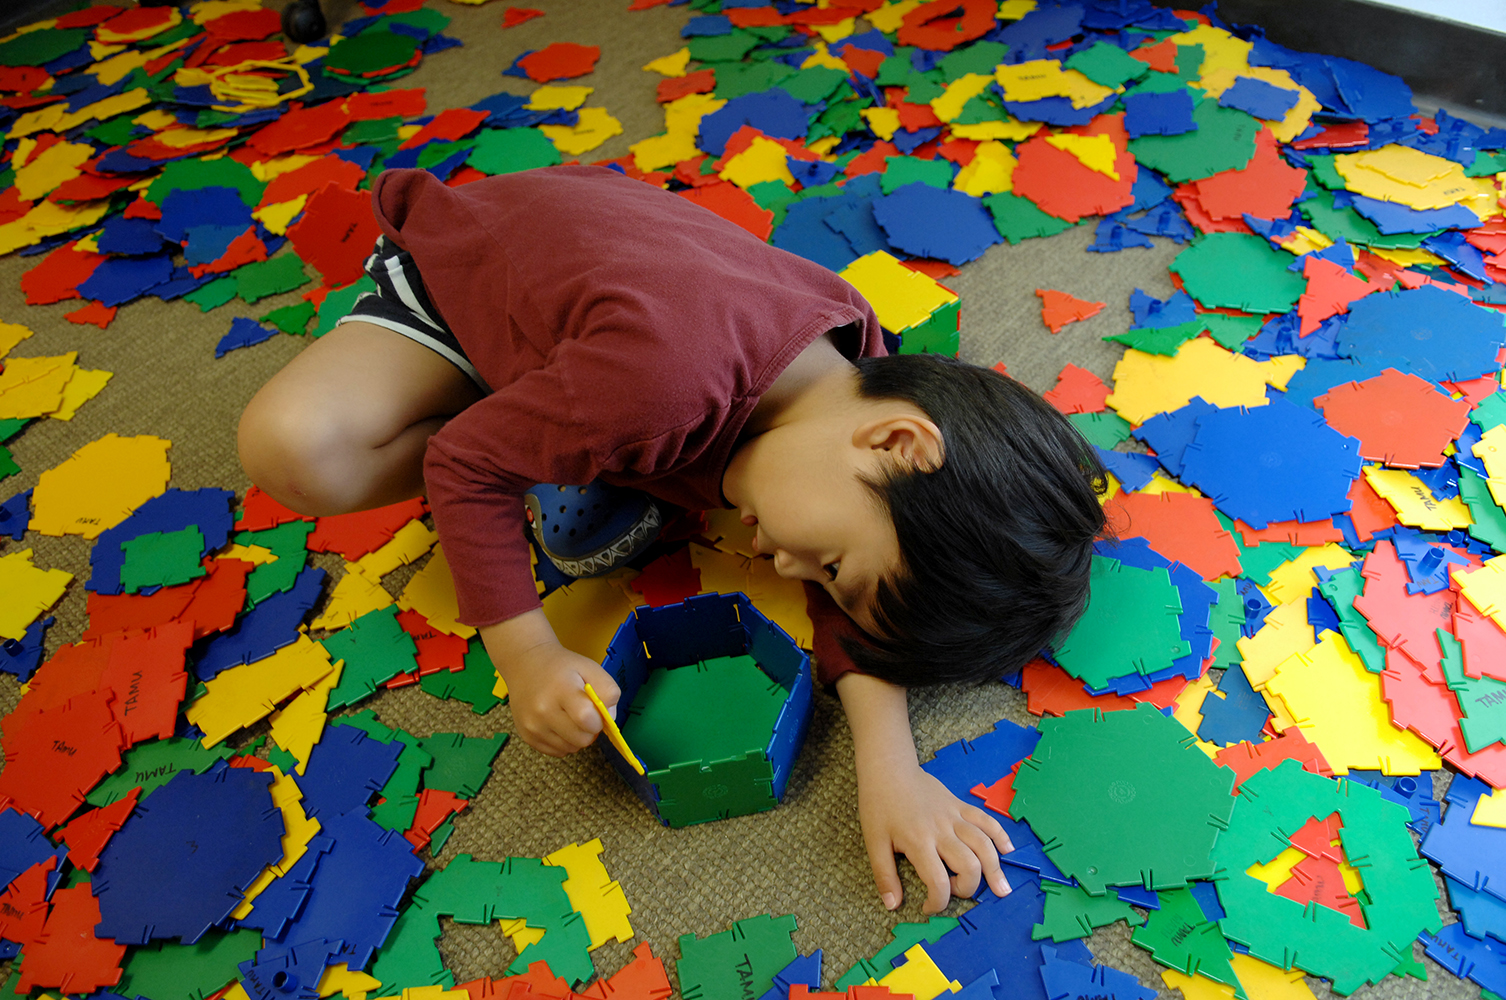 An elementary student sits and builds a tower on the floor with colorful tiles strewn around him